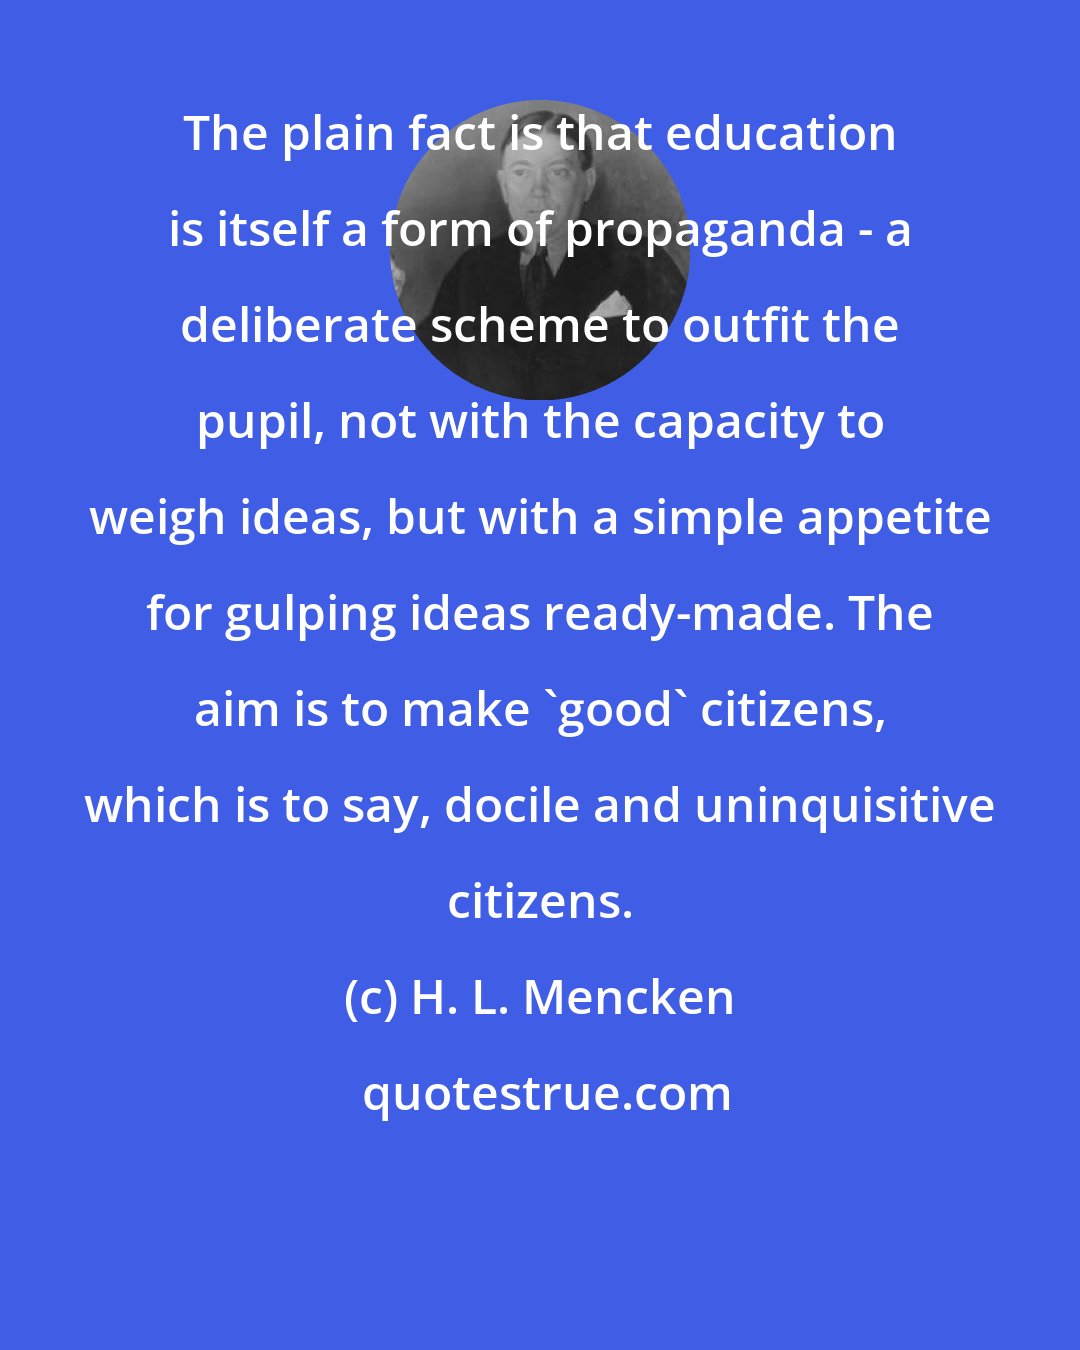 H. L. Mencken: The plain fact is that education is itself a form of propaganda - a deliberate scheme to outfit the pupil, not with the capacity to weigh ideas, but with a simple appetite for gulping ideas ready-made. The aim is to make 'good' citizens, which is to say, docile and uninquisitive citizens.